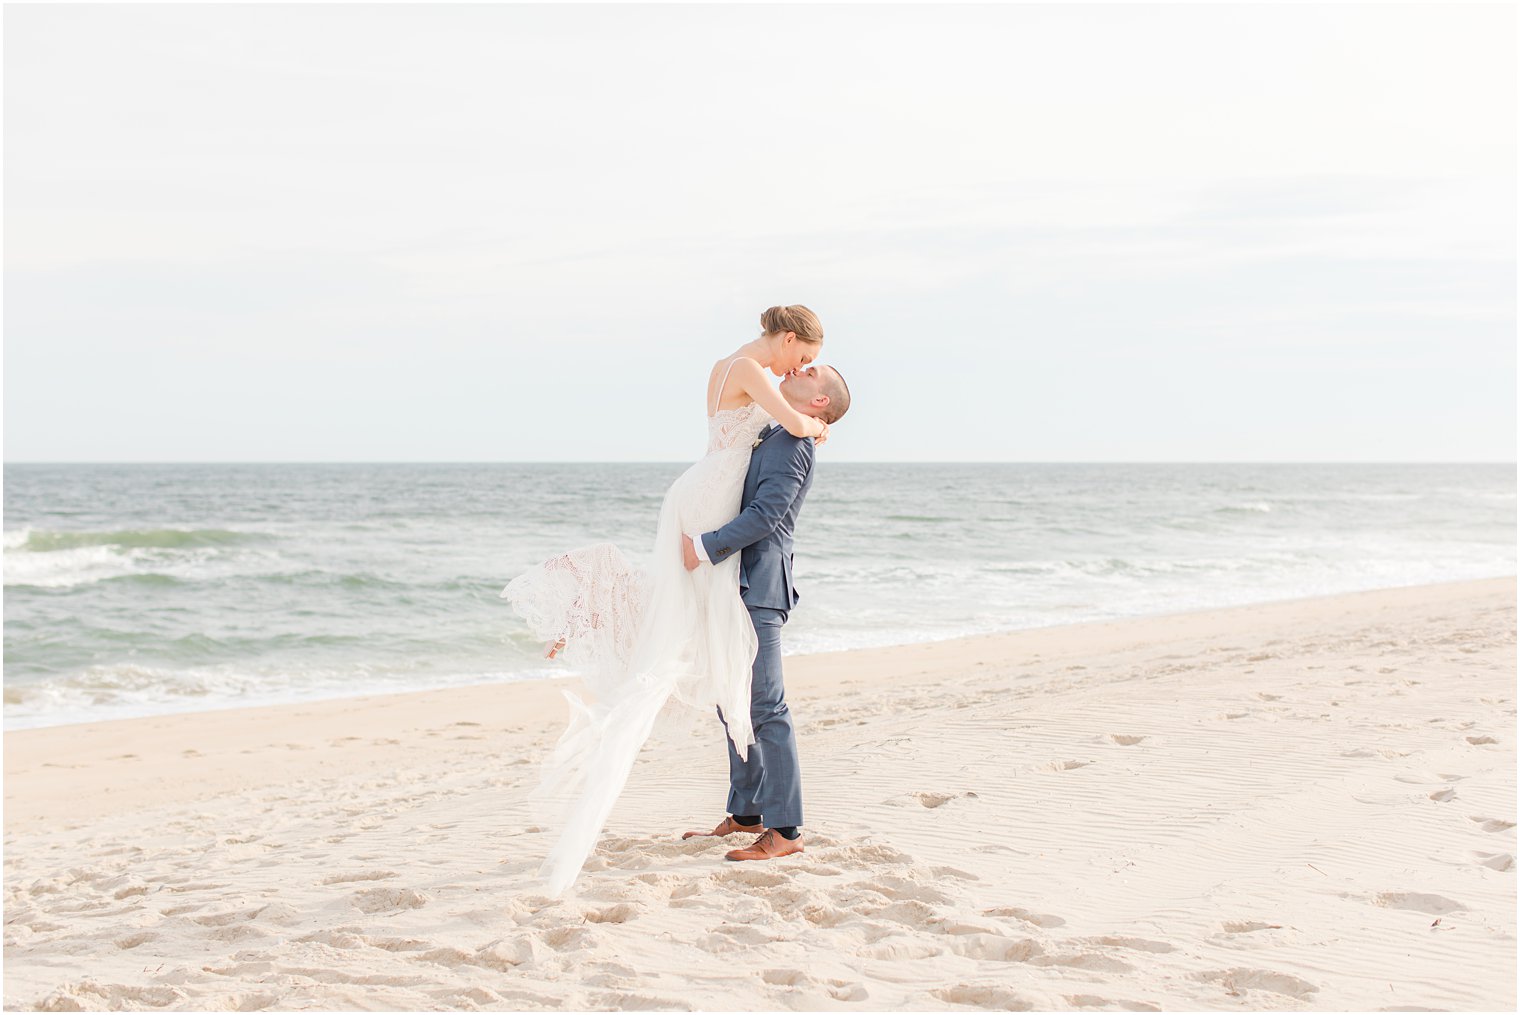 groom lifts bride up while kissing on beach